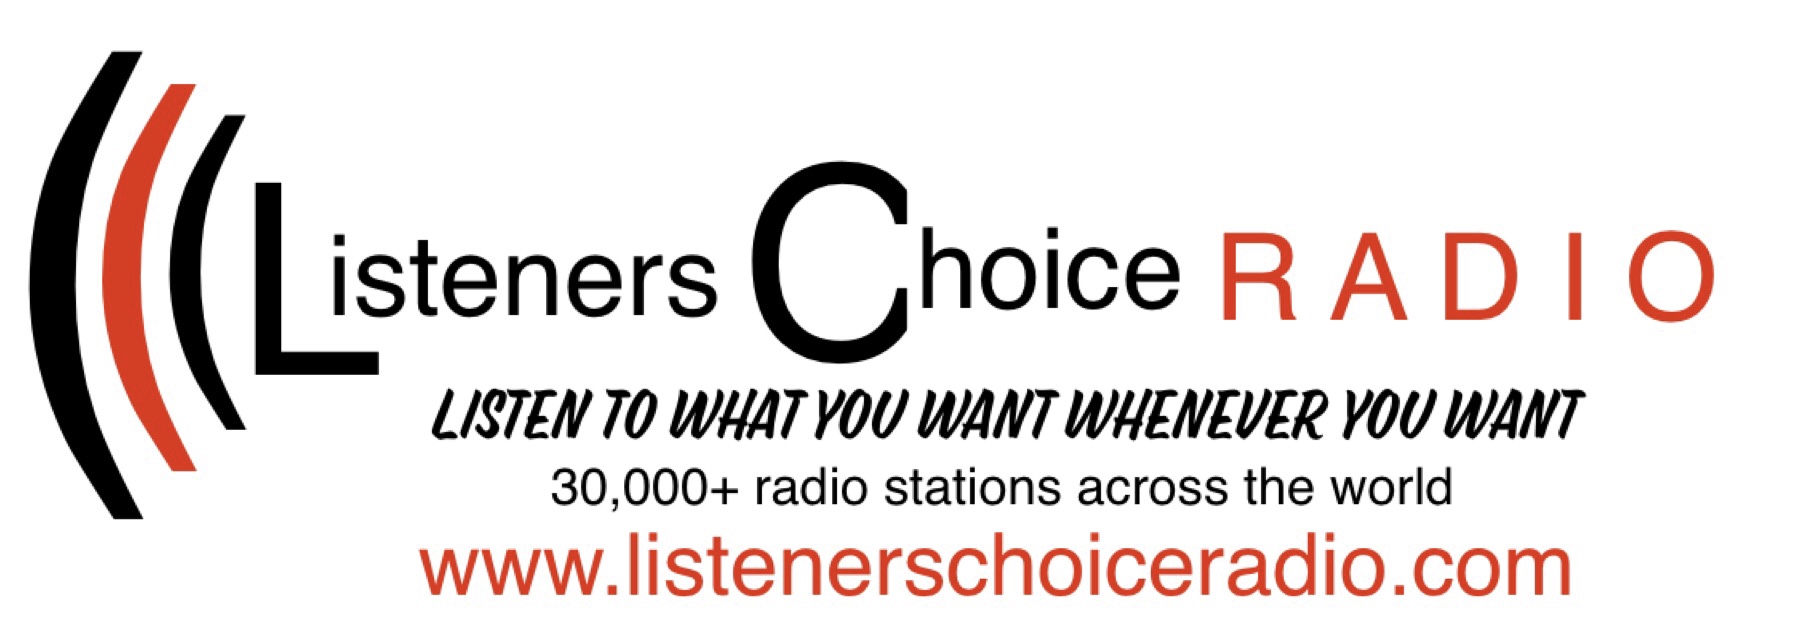 Listeners Choice Radio - Listen to what you want whenever you want.